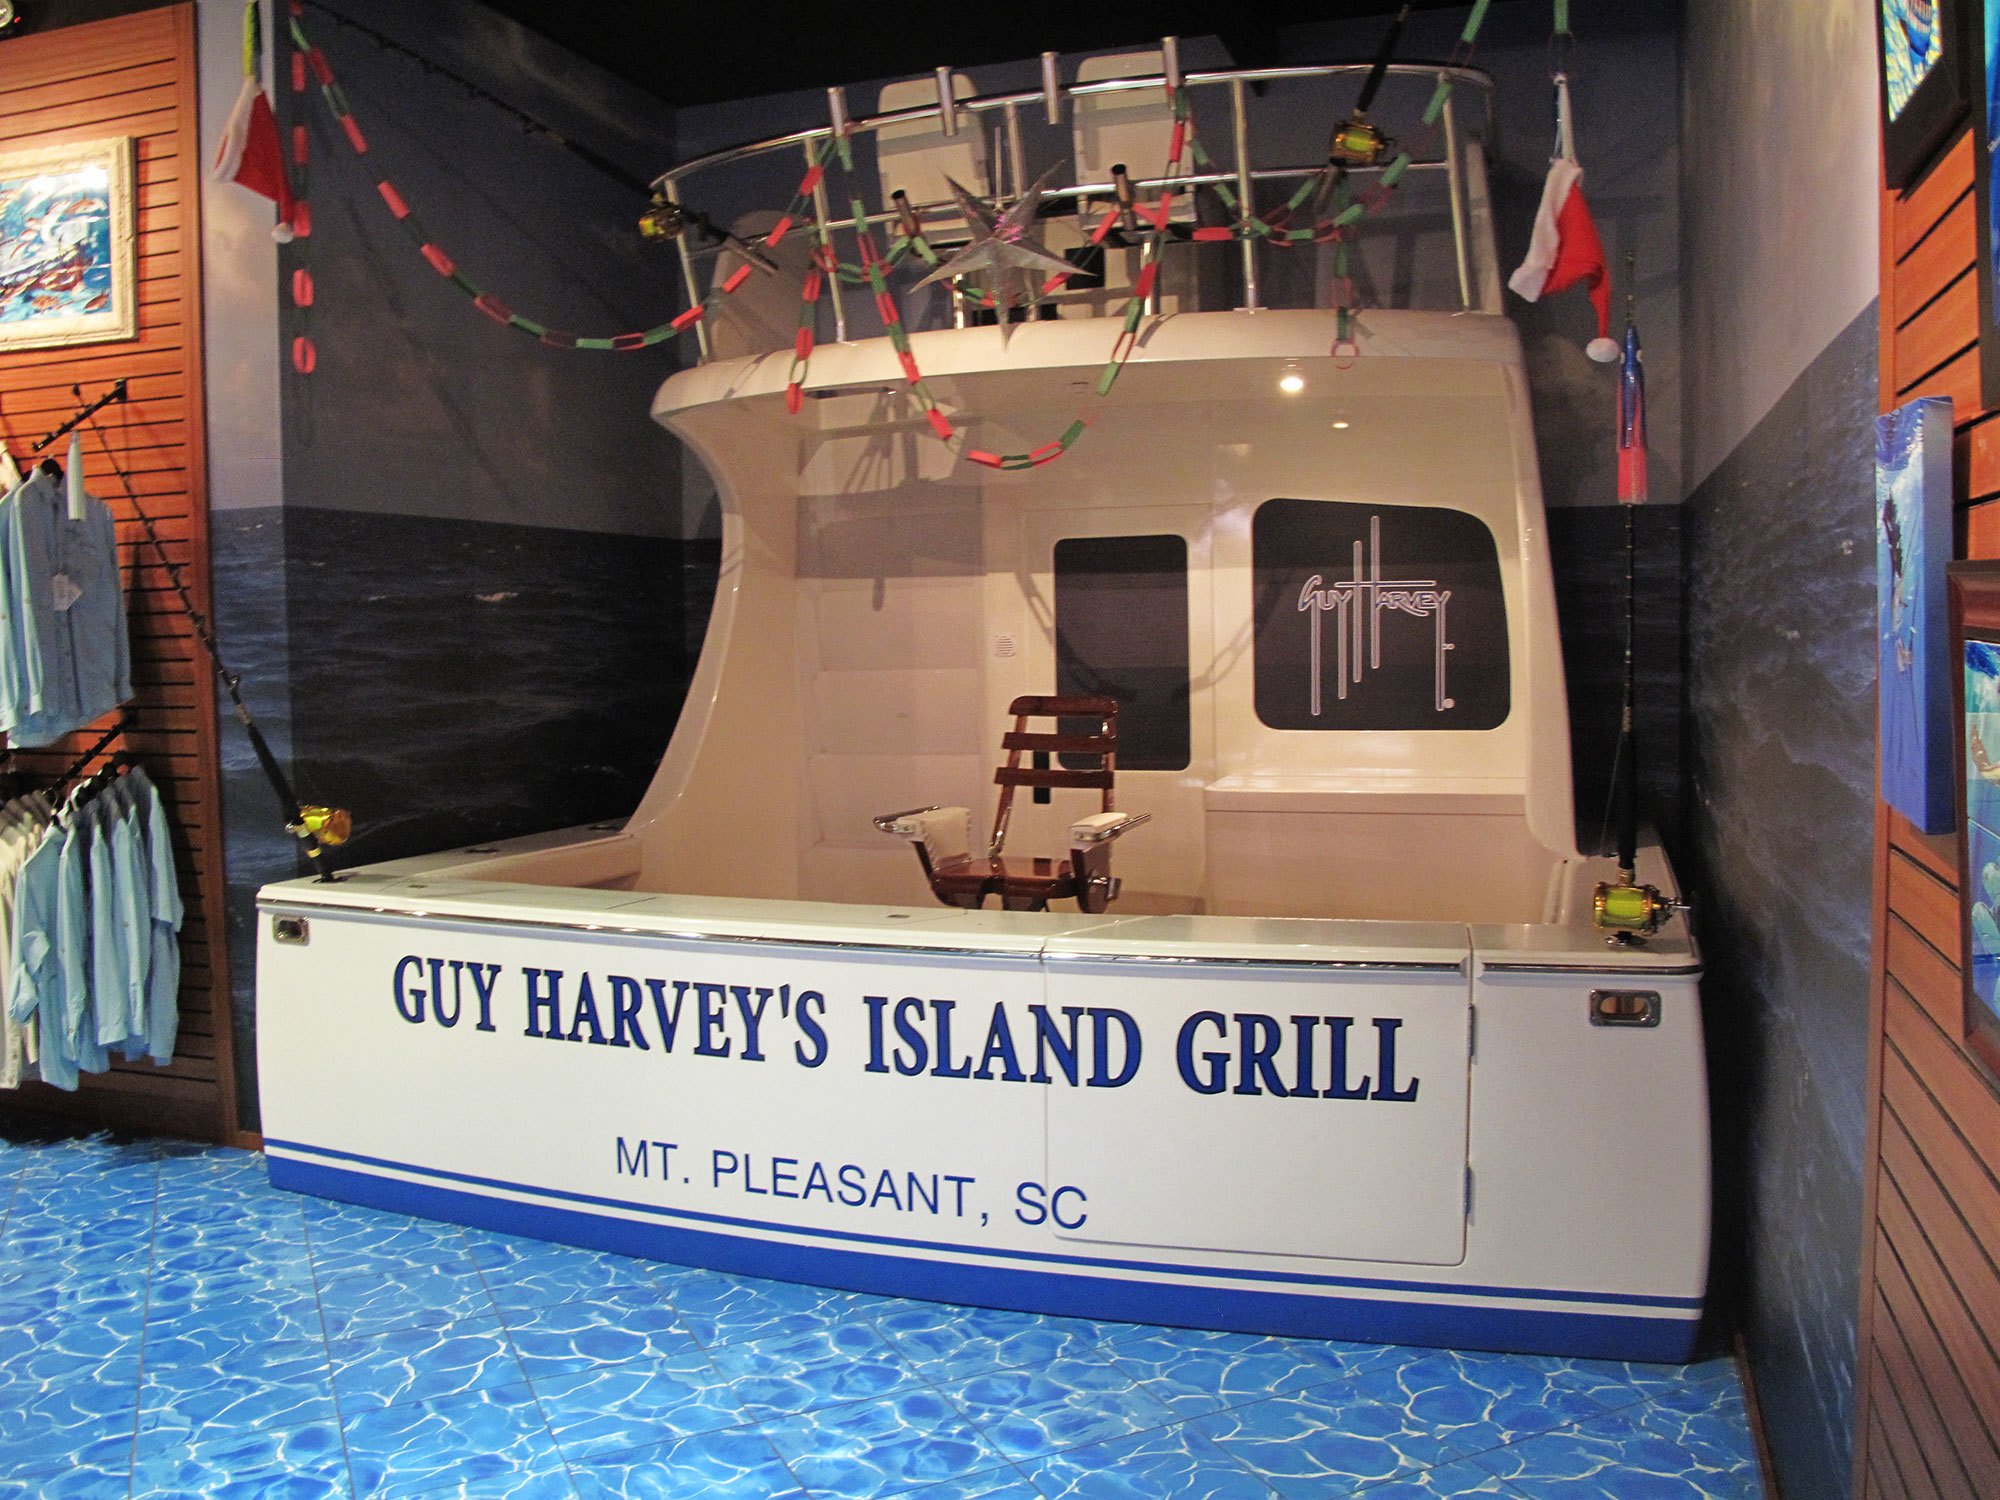 Boat Photo Op at Guy Harvey's Island Grill